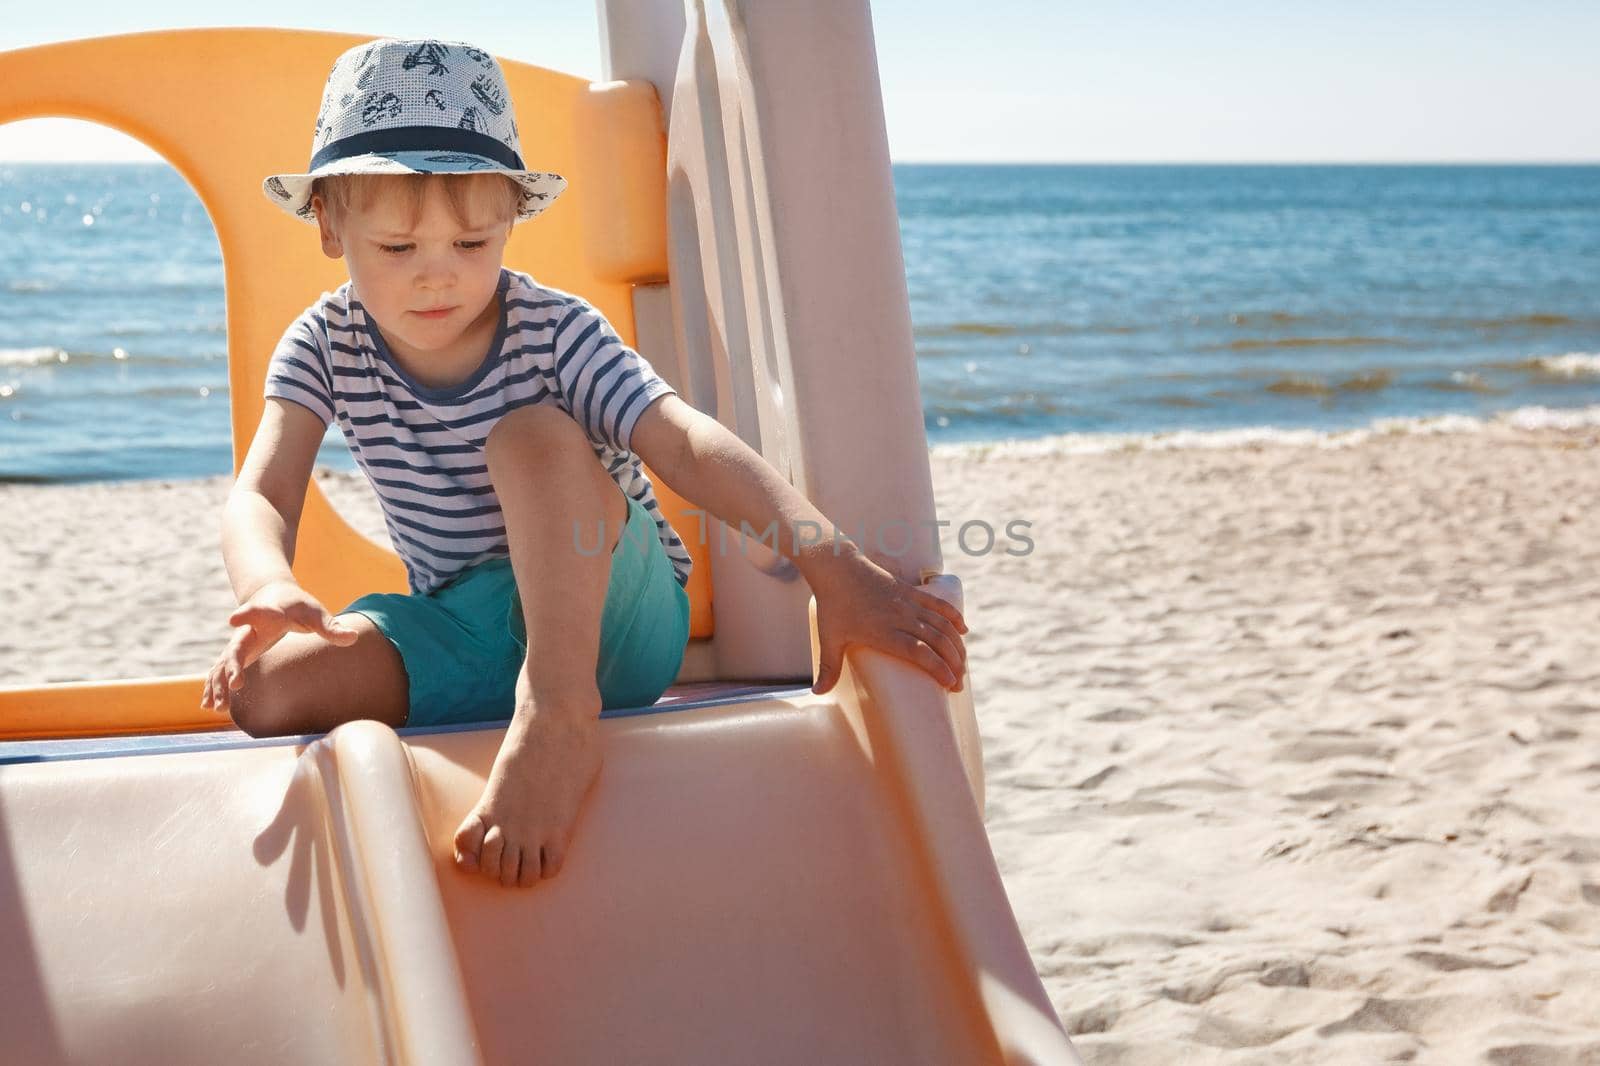 The boy is getting ready to slide down from the beach slide, sea background. by Lincikas